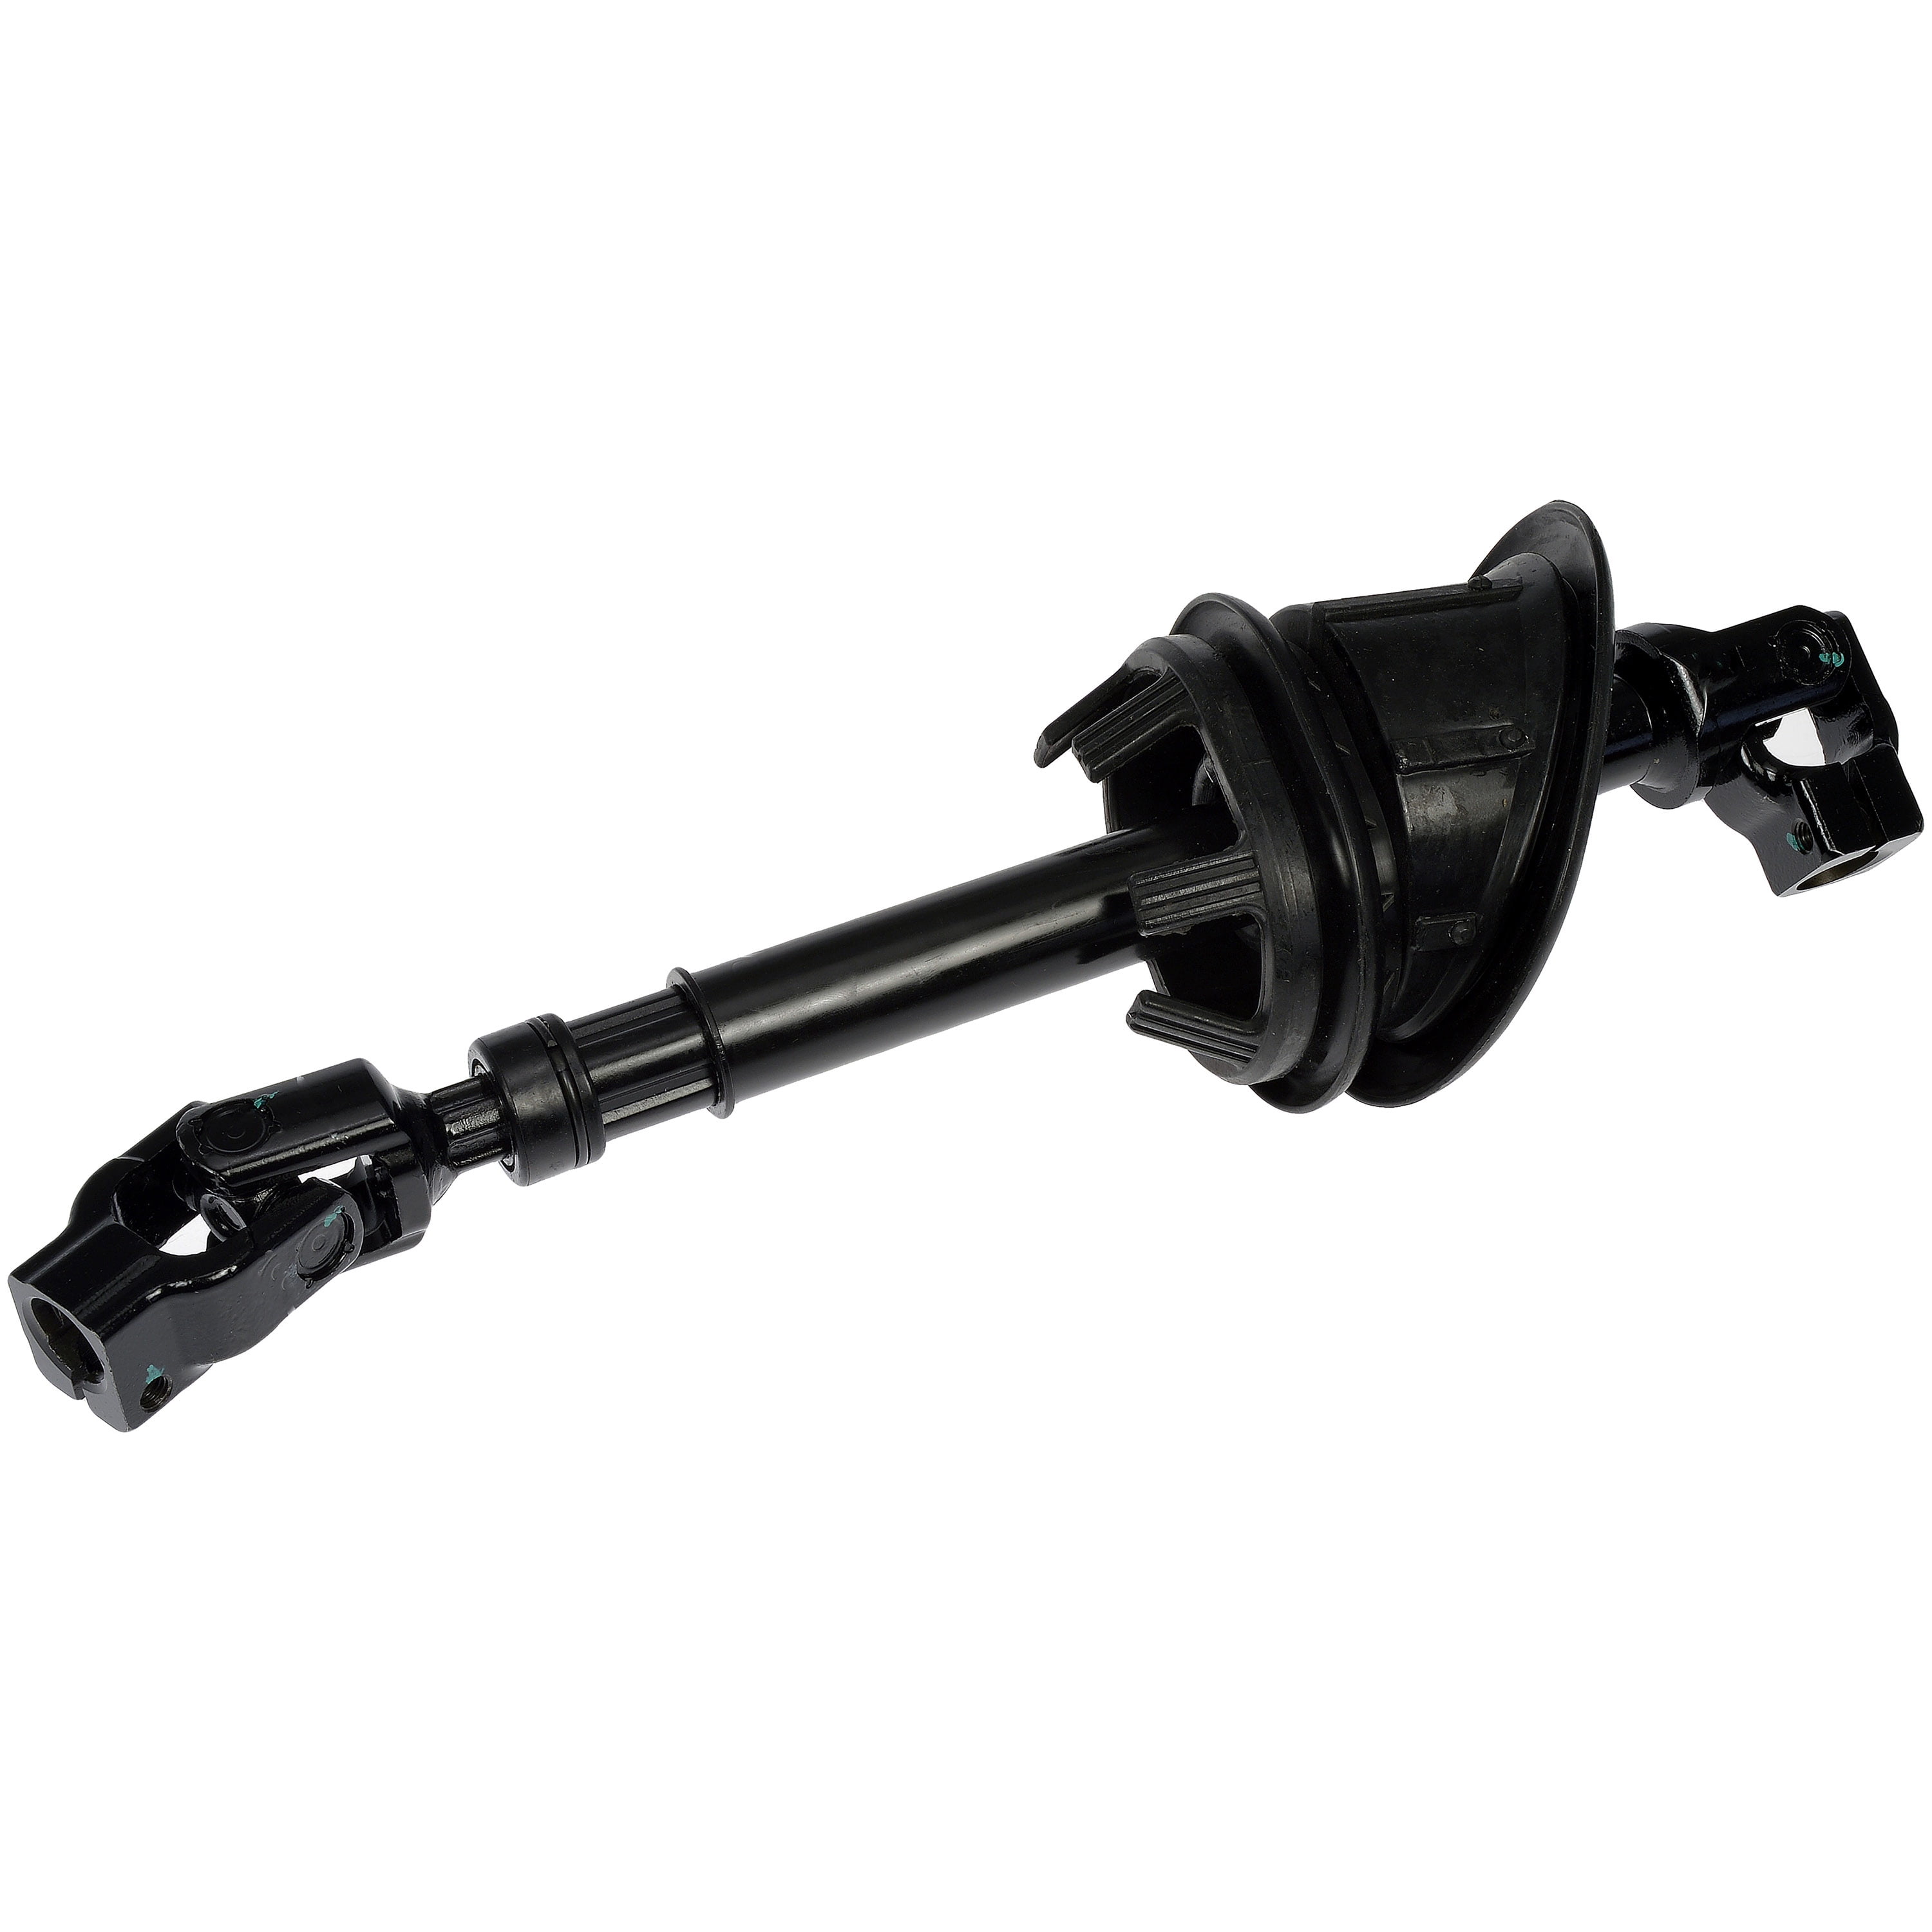 Dorman 425-875 Steering Shaft for Specific Audi Models Fits select:  2009-2015 AUDI A4, 2008-2017 AUDI A5